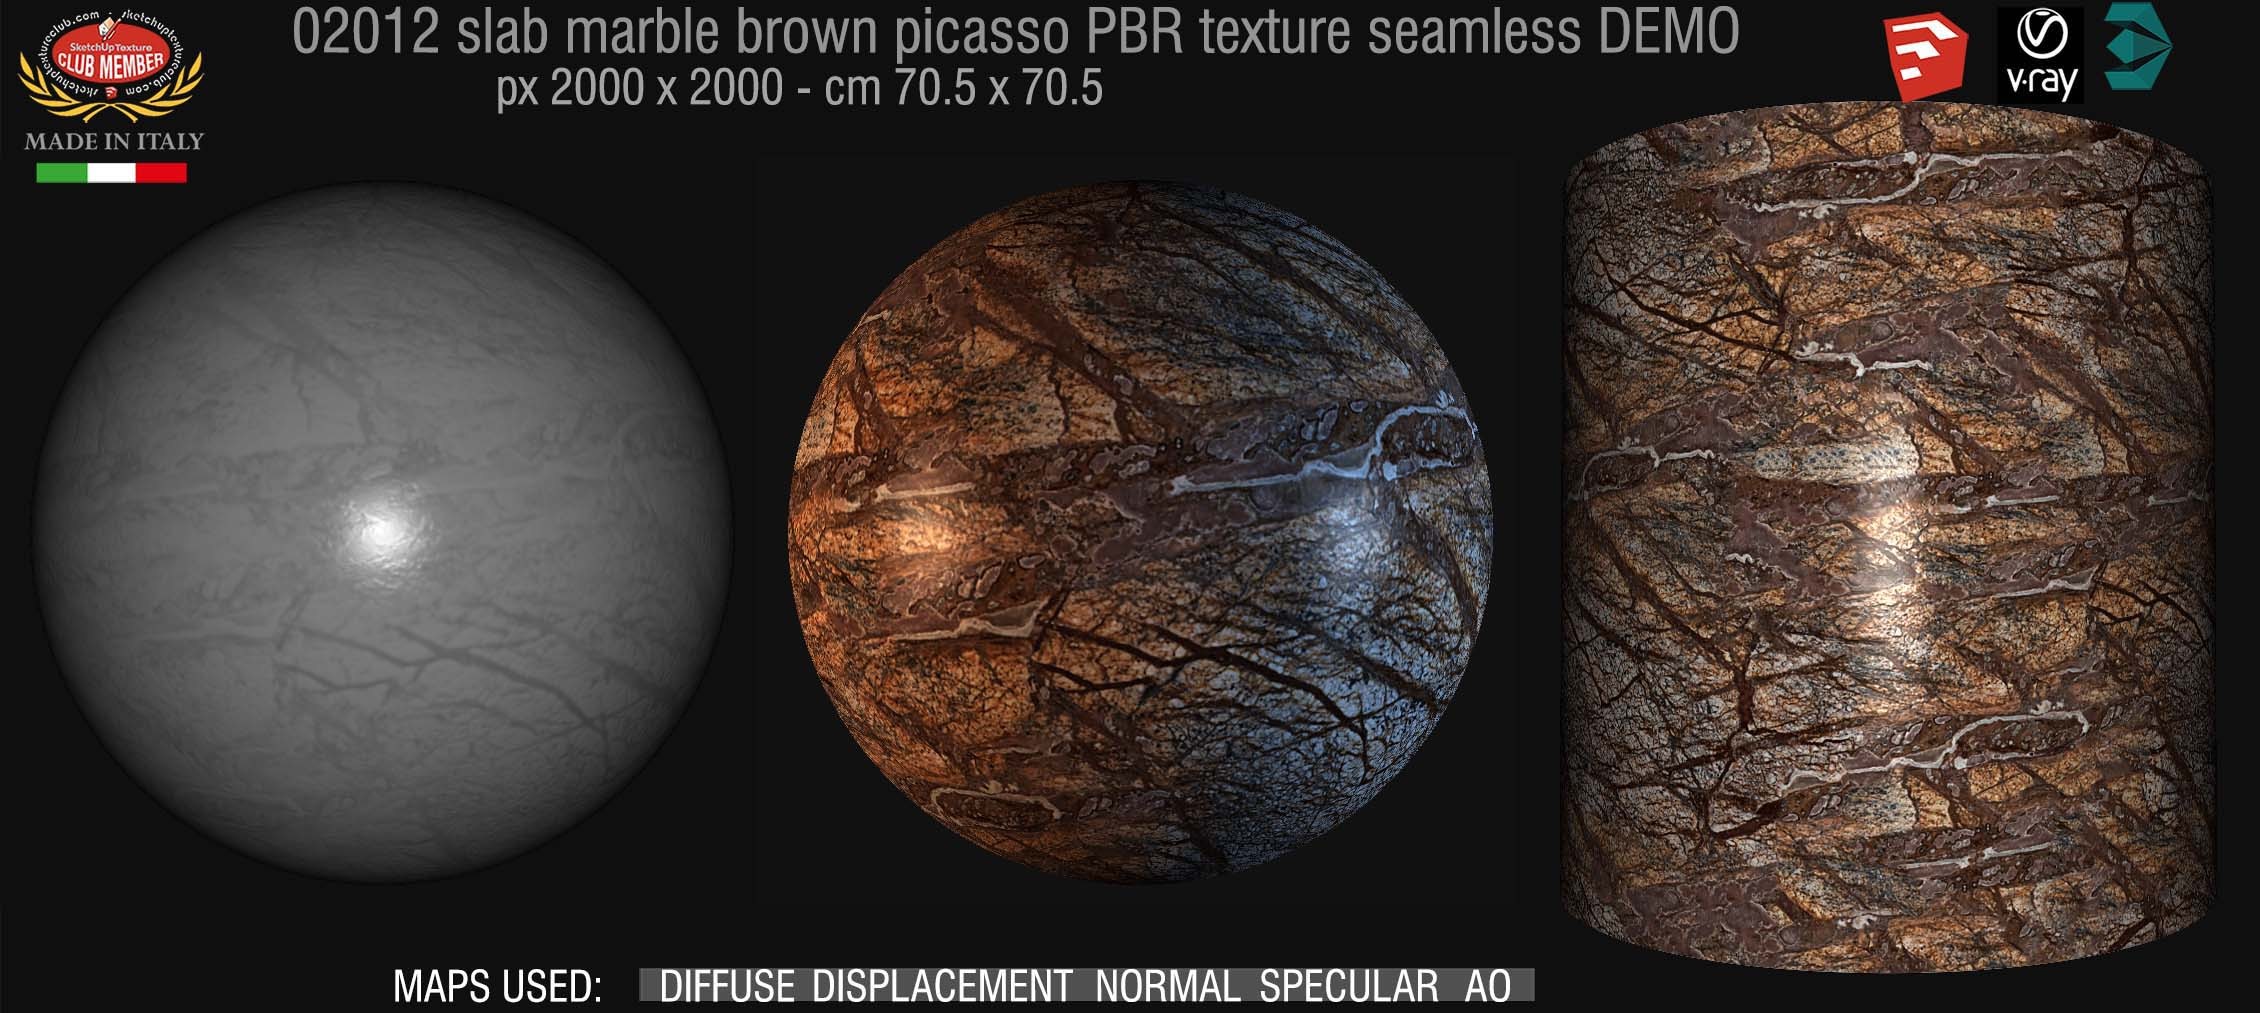 02012 slab marble  brown picasso PBR texture seamless DEMO